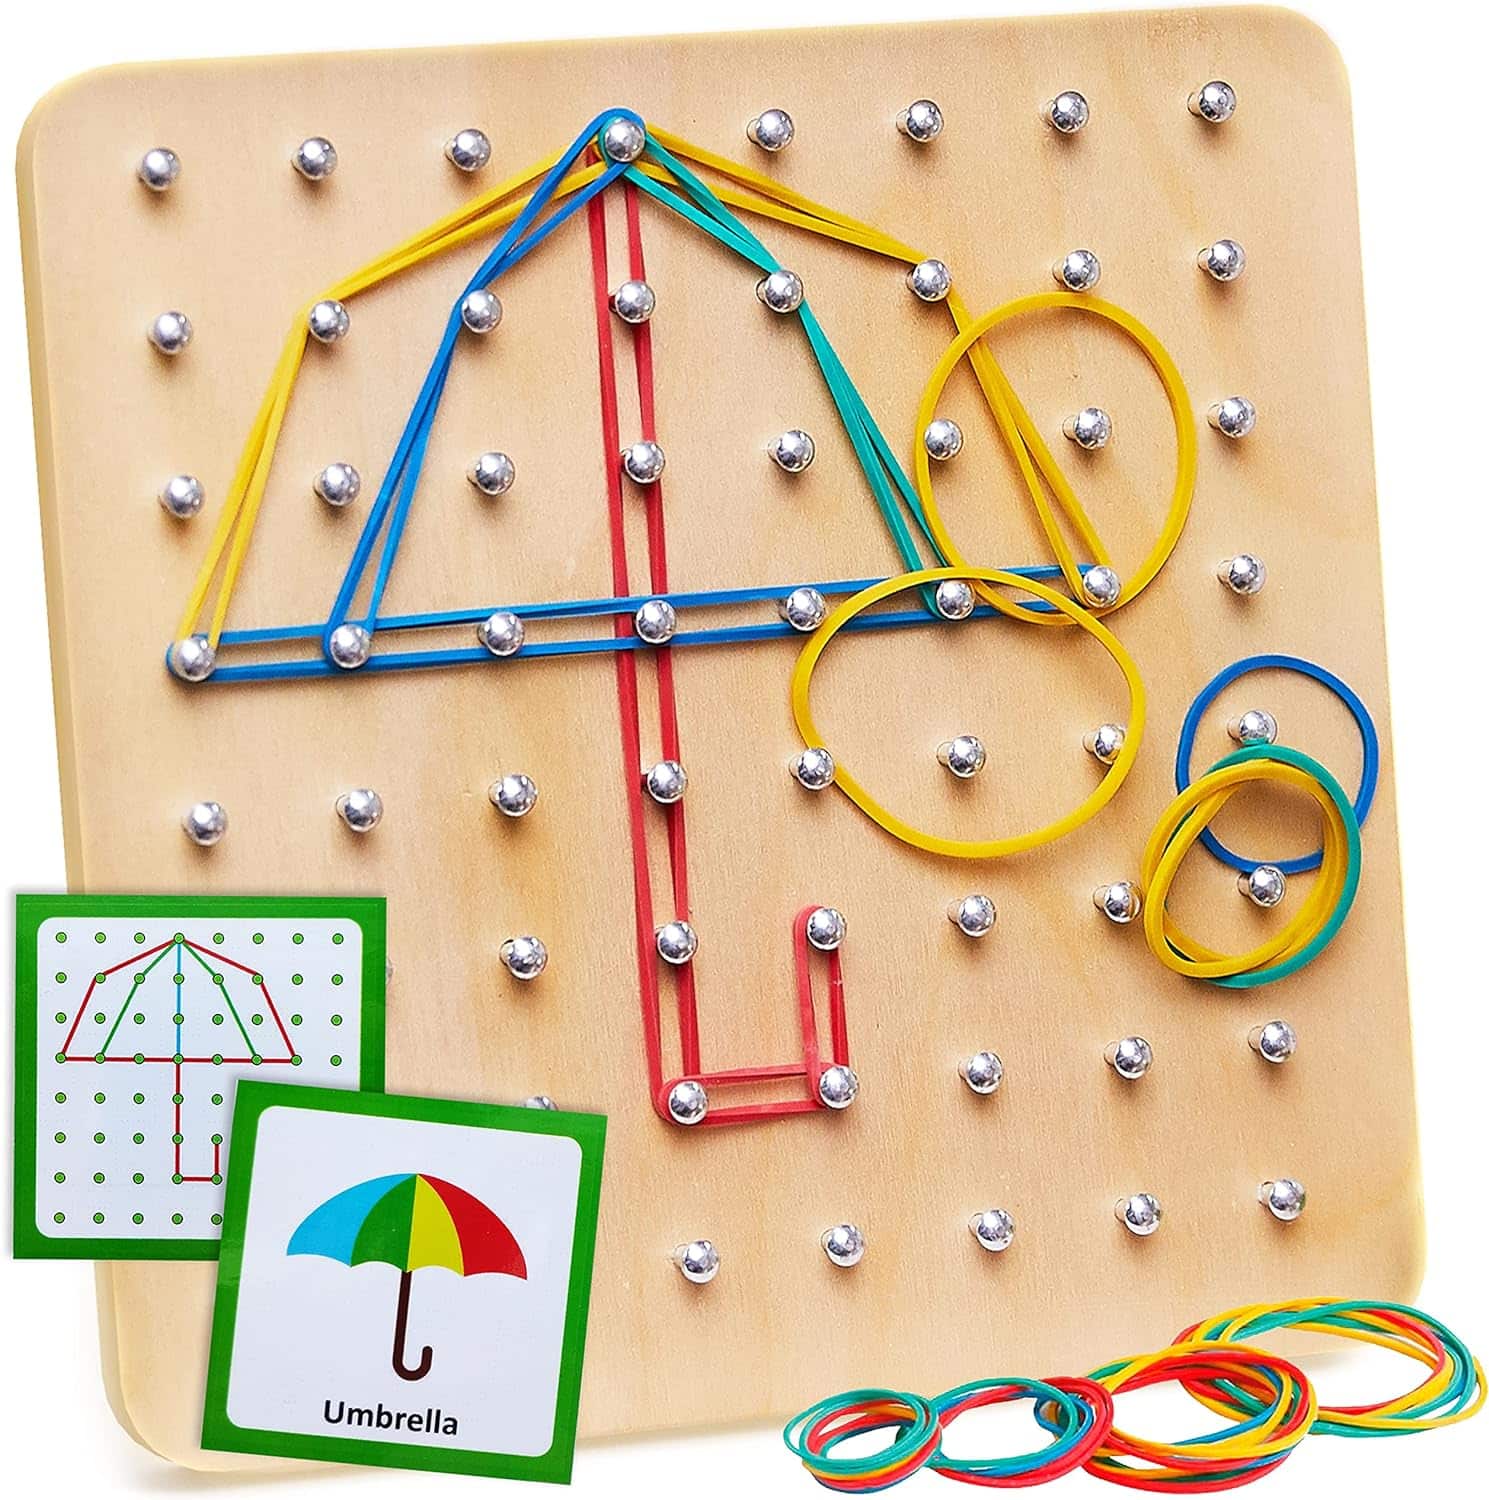 Panda Brothers Wooden Geoboard - Montessori Toys for 3 4 5 Year Old Kids and Toddlers, Educational Toy with 30 Pattern Cards and 40 Rubber Bands to Create Figures, Brain Teaser STEM Toy Geo Board